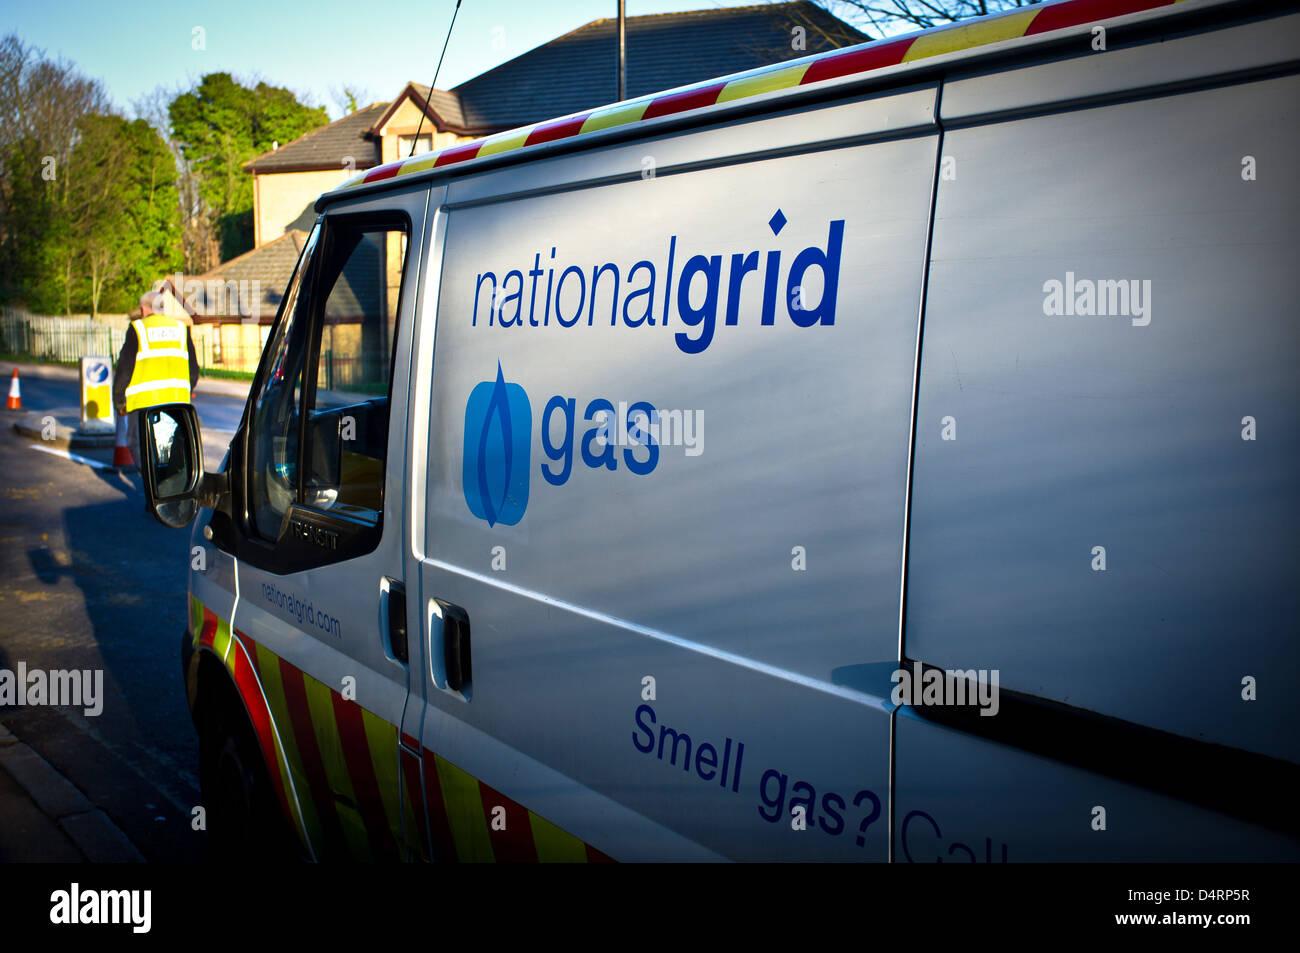 National Grid Van seen from the side Stock Photo